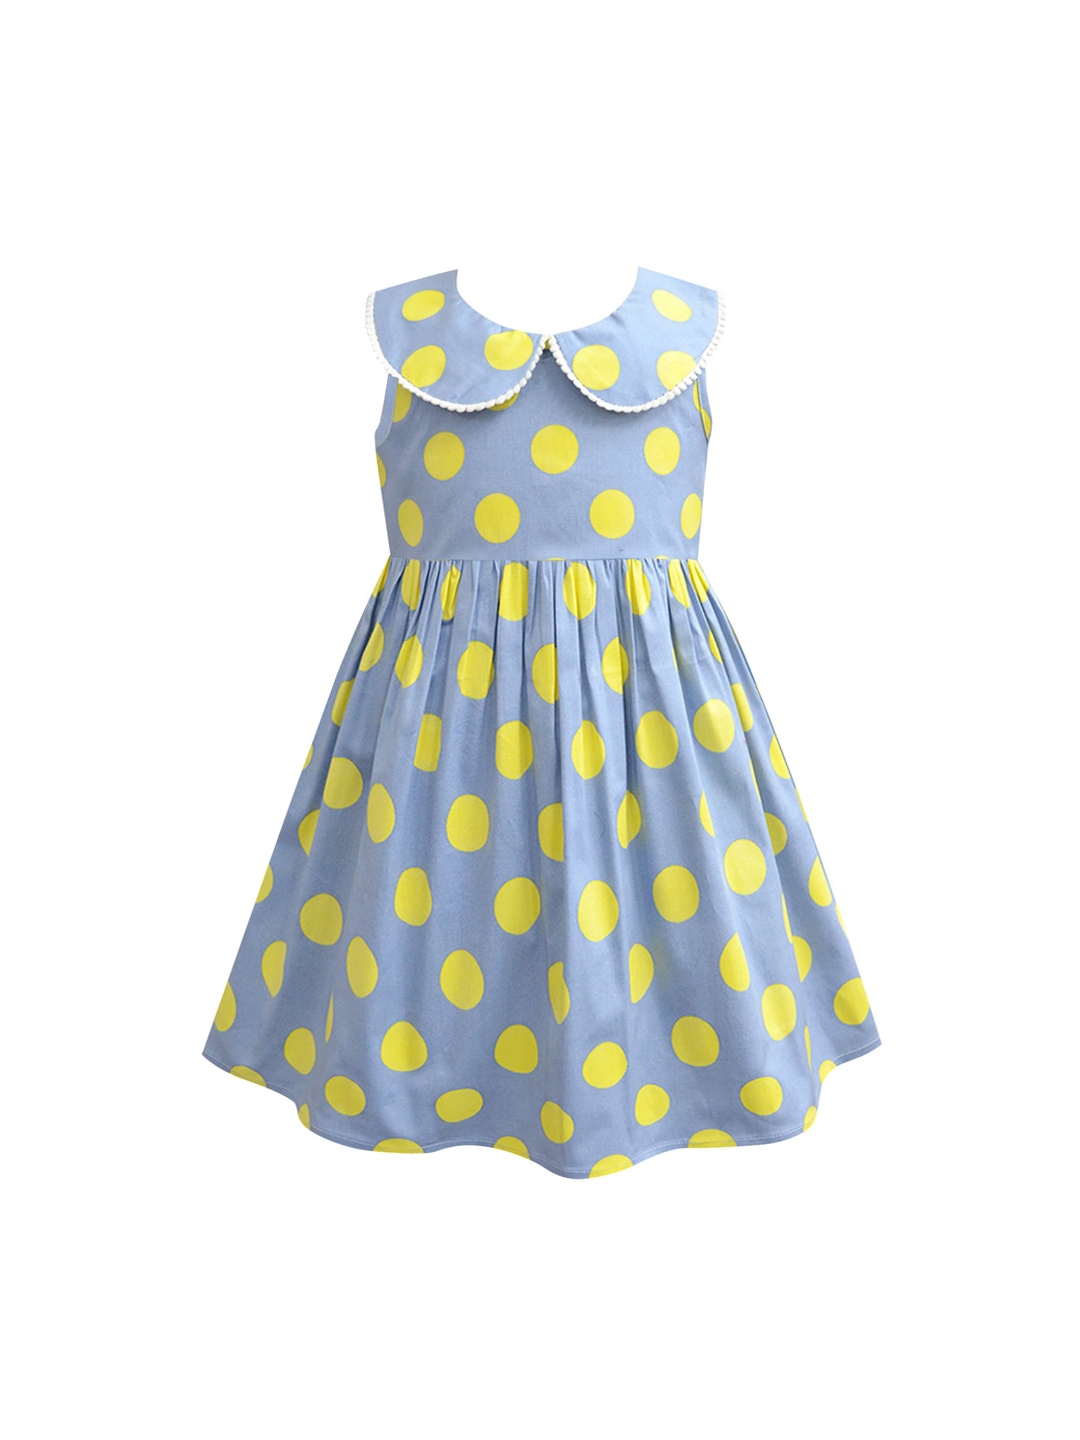 

A.T.U.N. Girls Blue and Yellow Polka Dots Printed Fit and Flare Dress